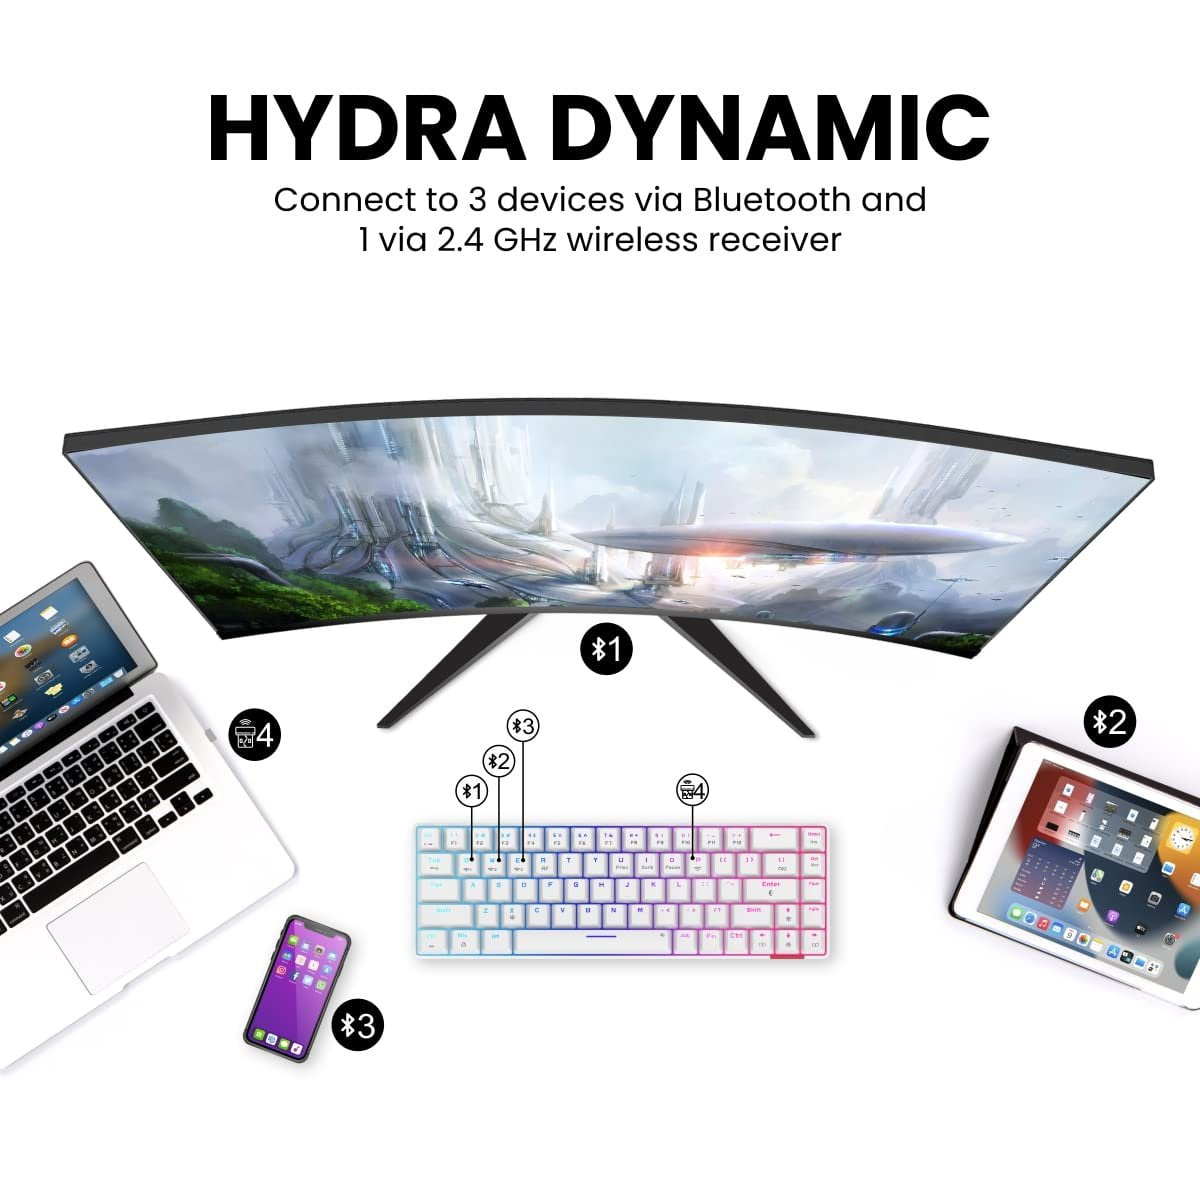 Portronics Hydra 10 Mechanical Wireless Gaming Keyboard 8 Shop Mobile Accessories Online in India